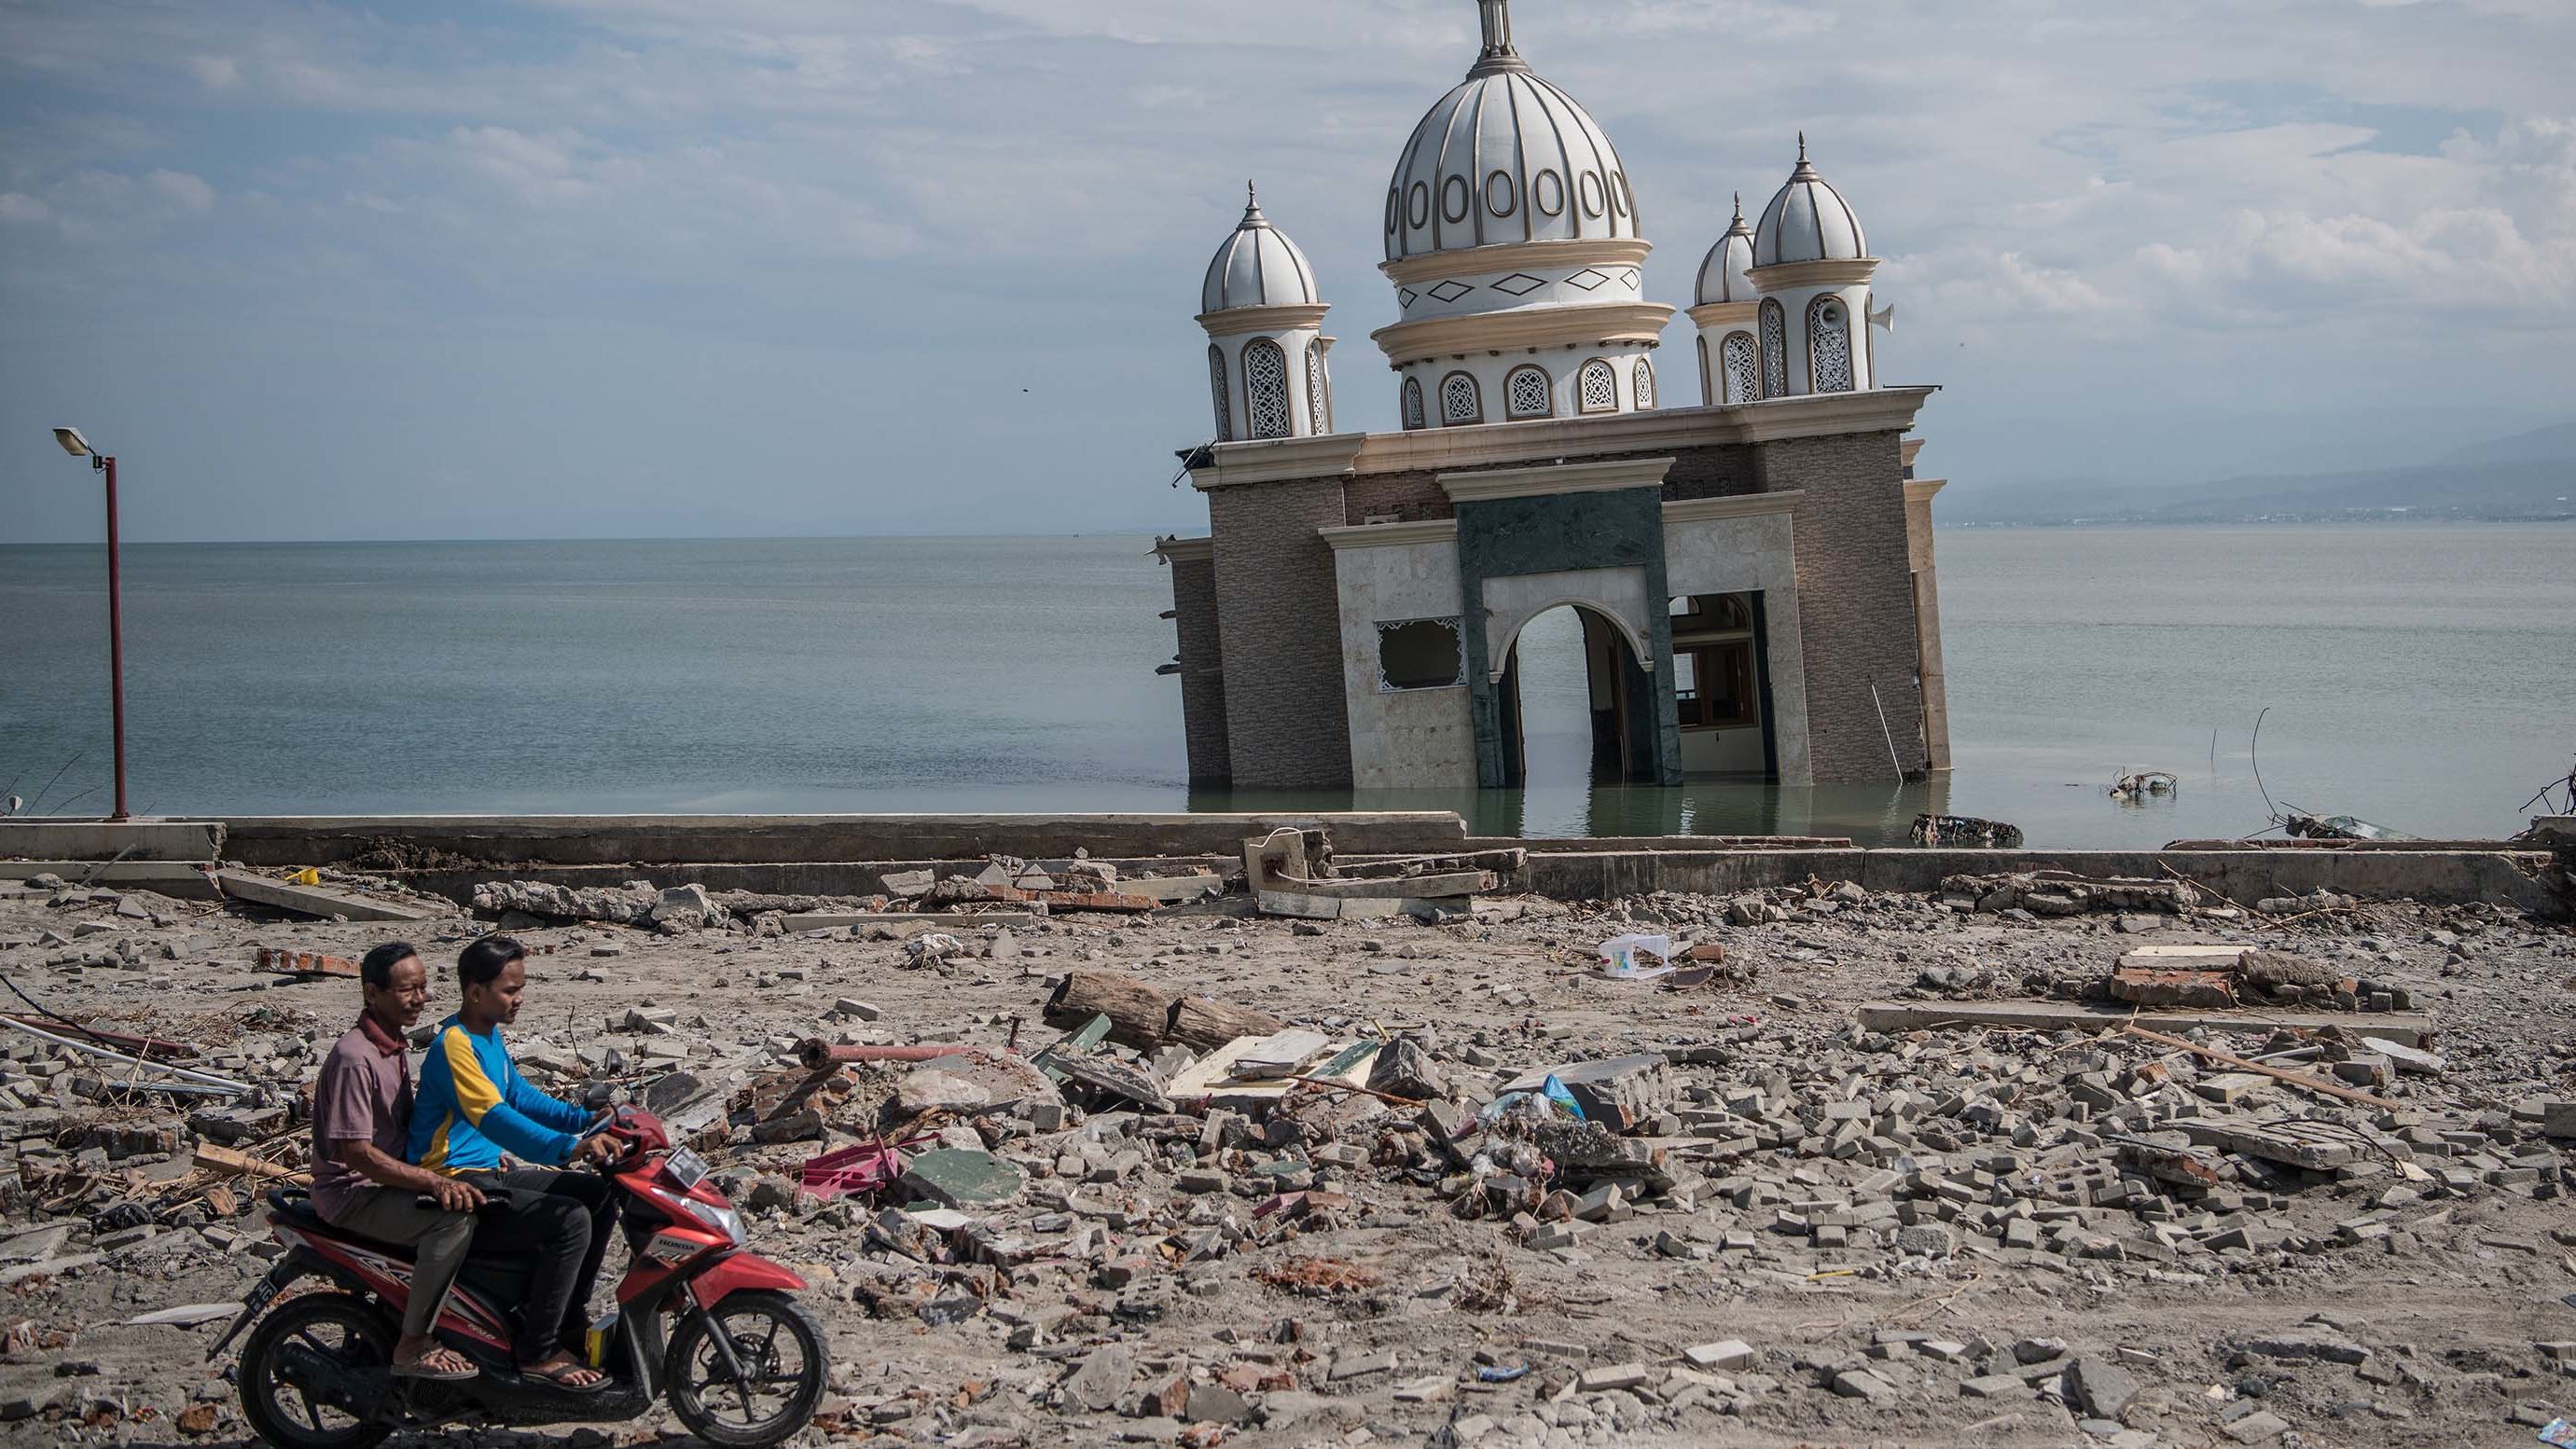 People ride a scooter past a partially submerged mosque in Palu on October 2. The mosque was knocked from its foundation during the quake and tsunami.